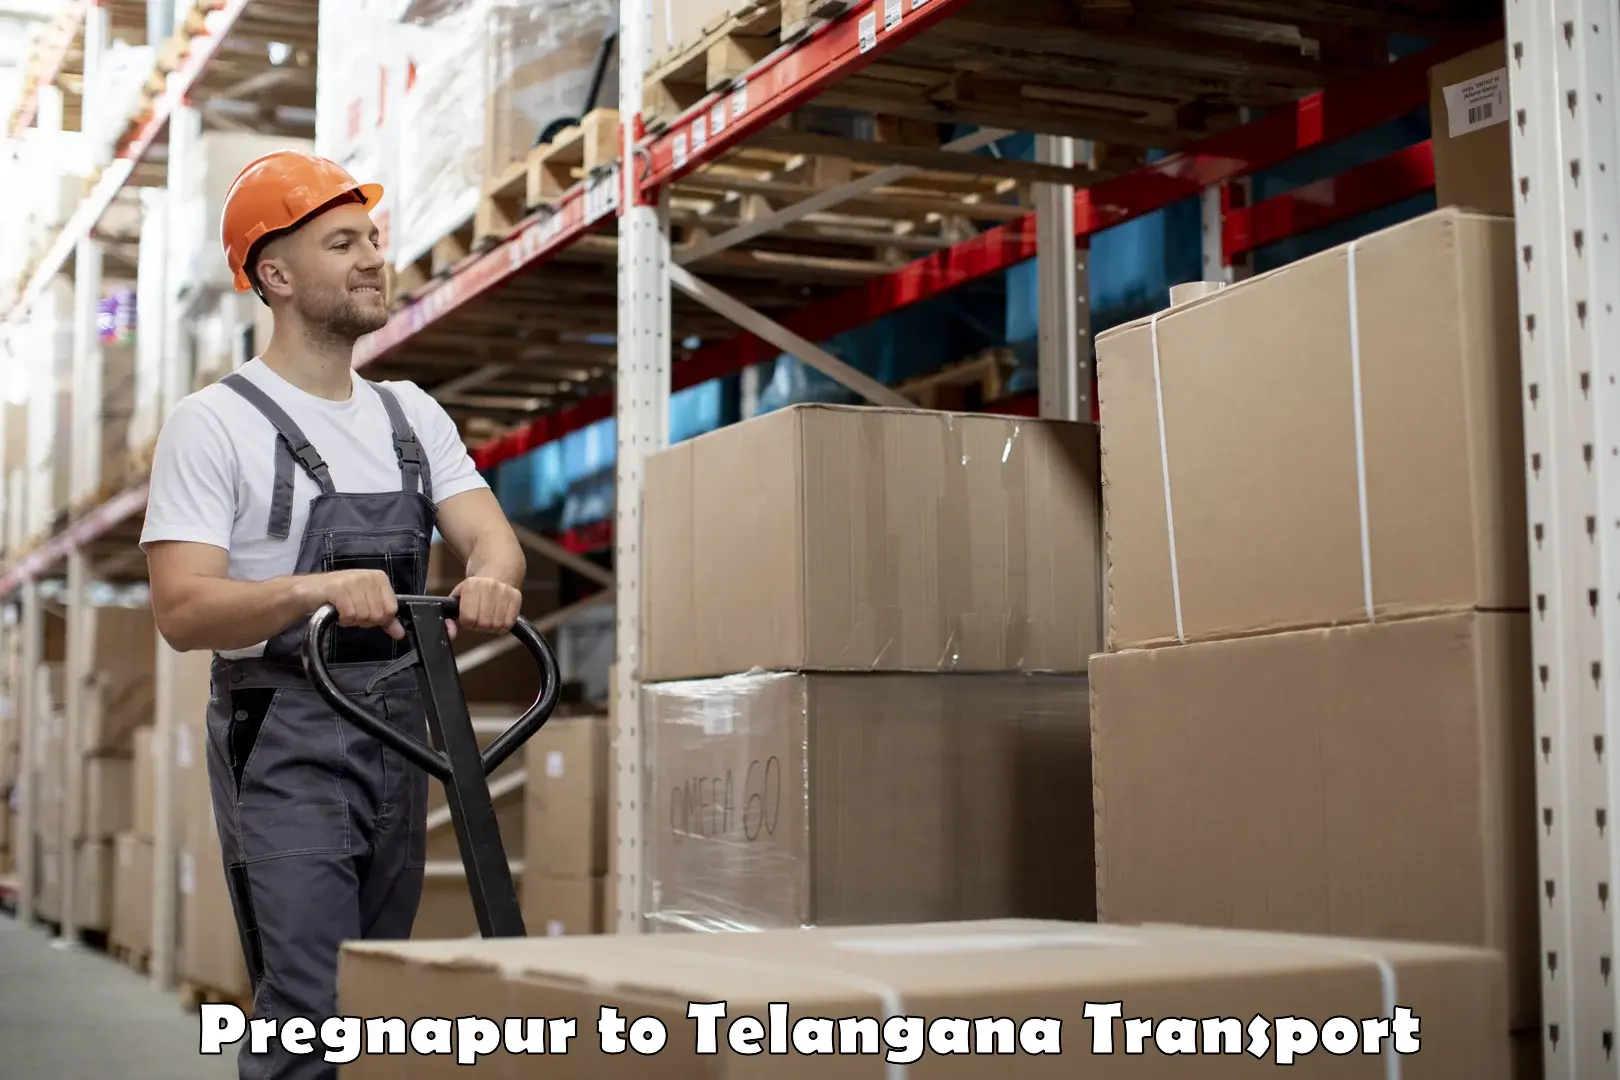 Package delivery services Pregnapur to Hyderabad